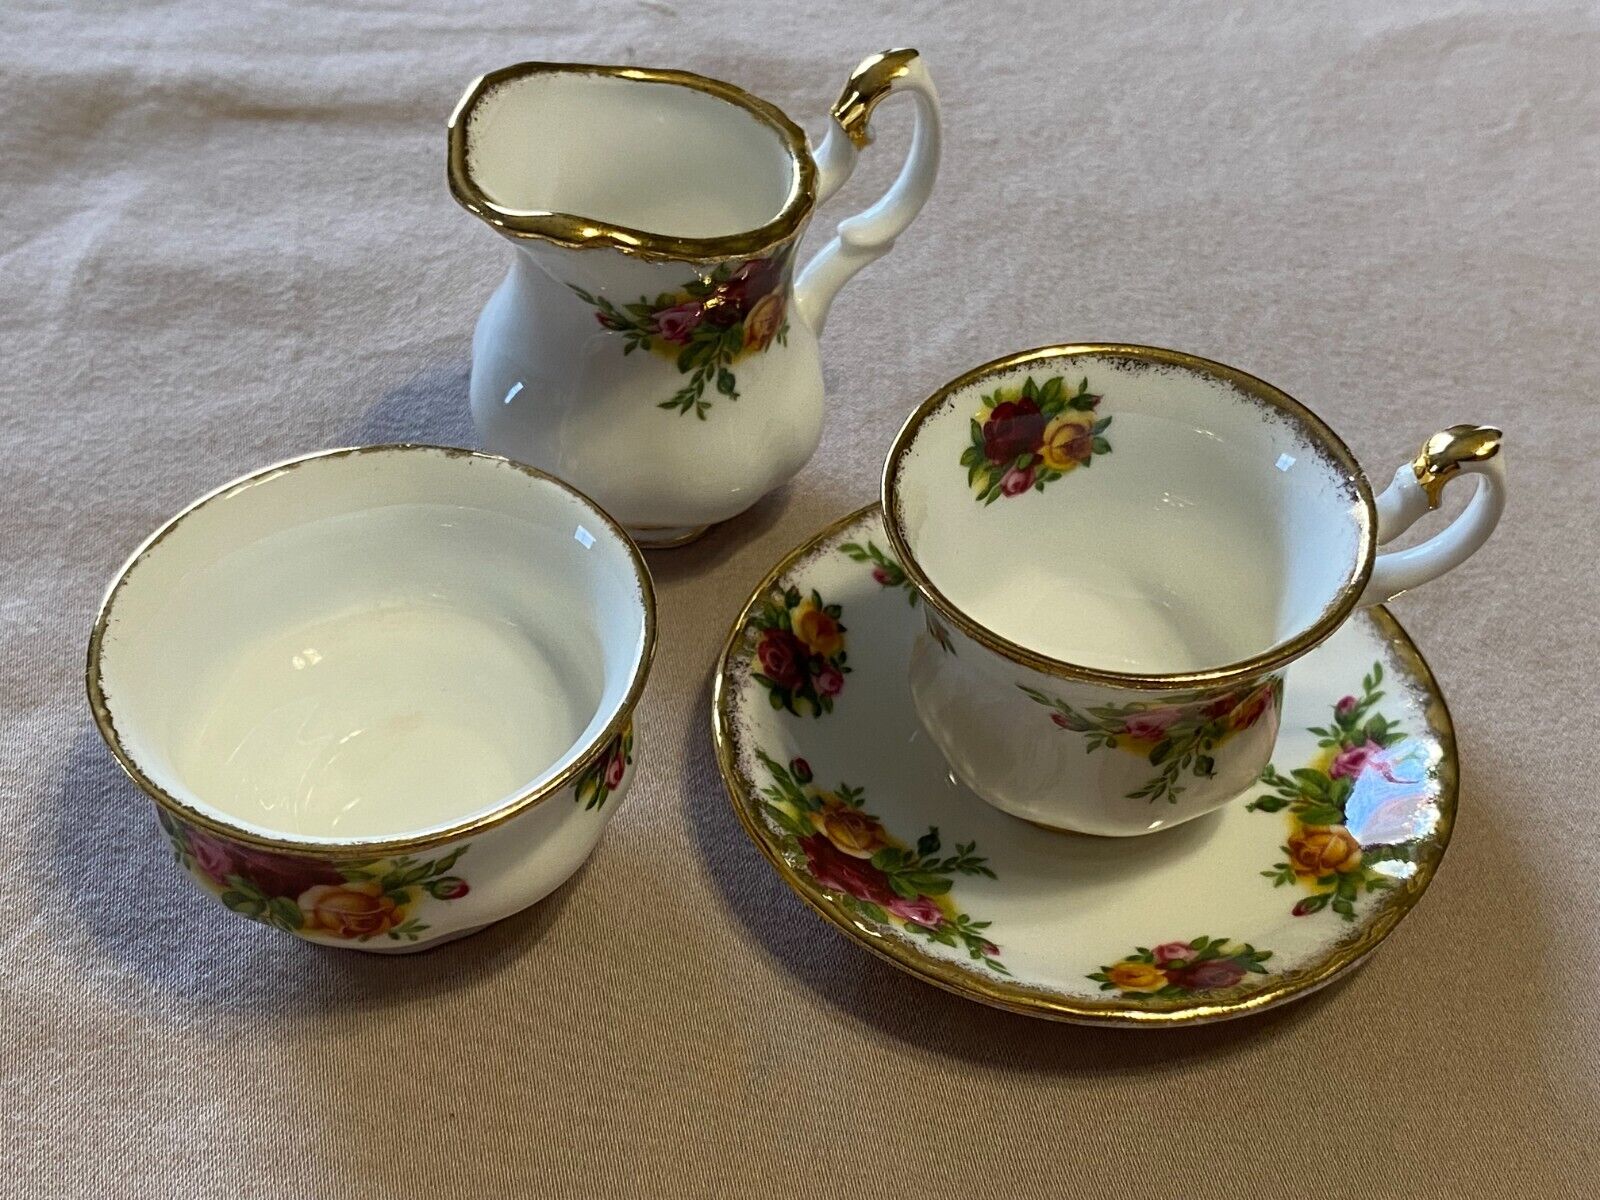 1962 Royal Albert Old Country Roses Miniature Tea Set Made in England